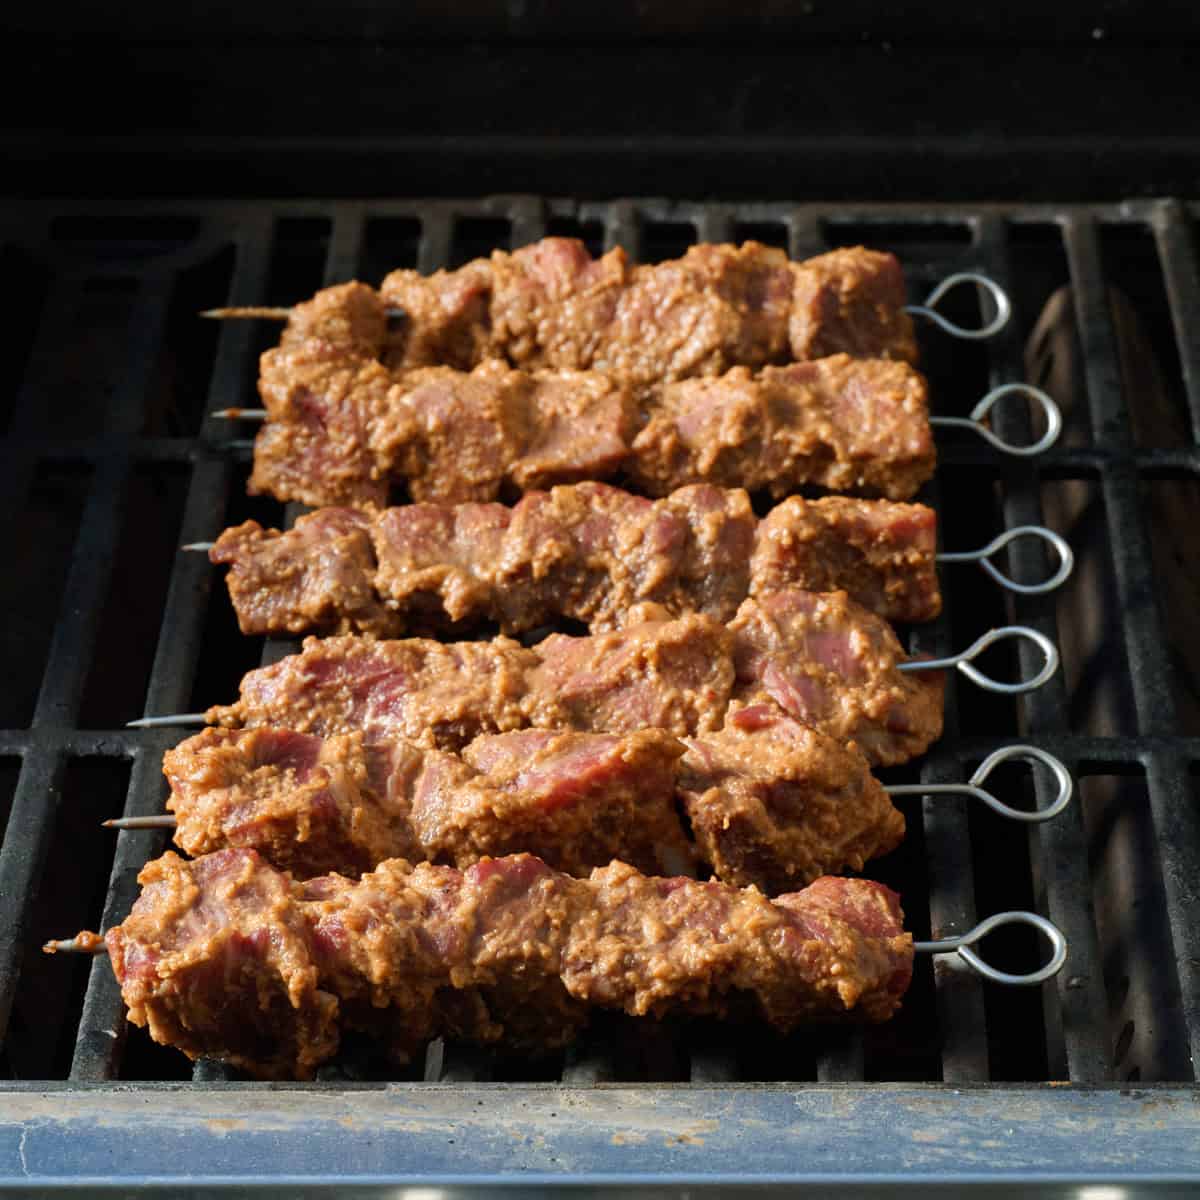 Skewered marinated beef on a grill before cooking.